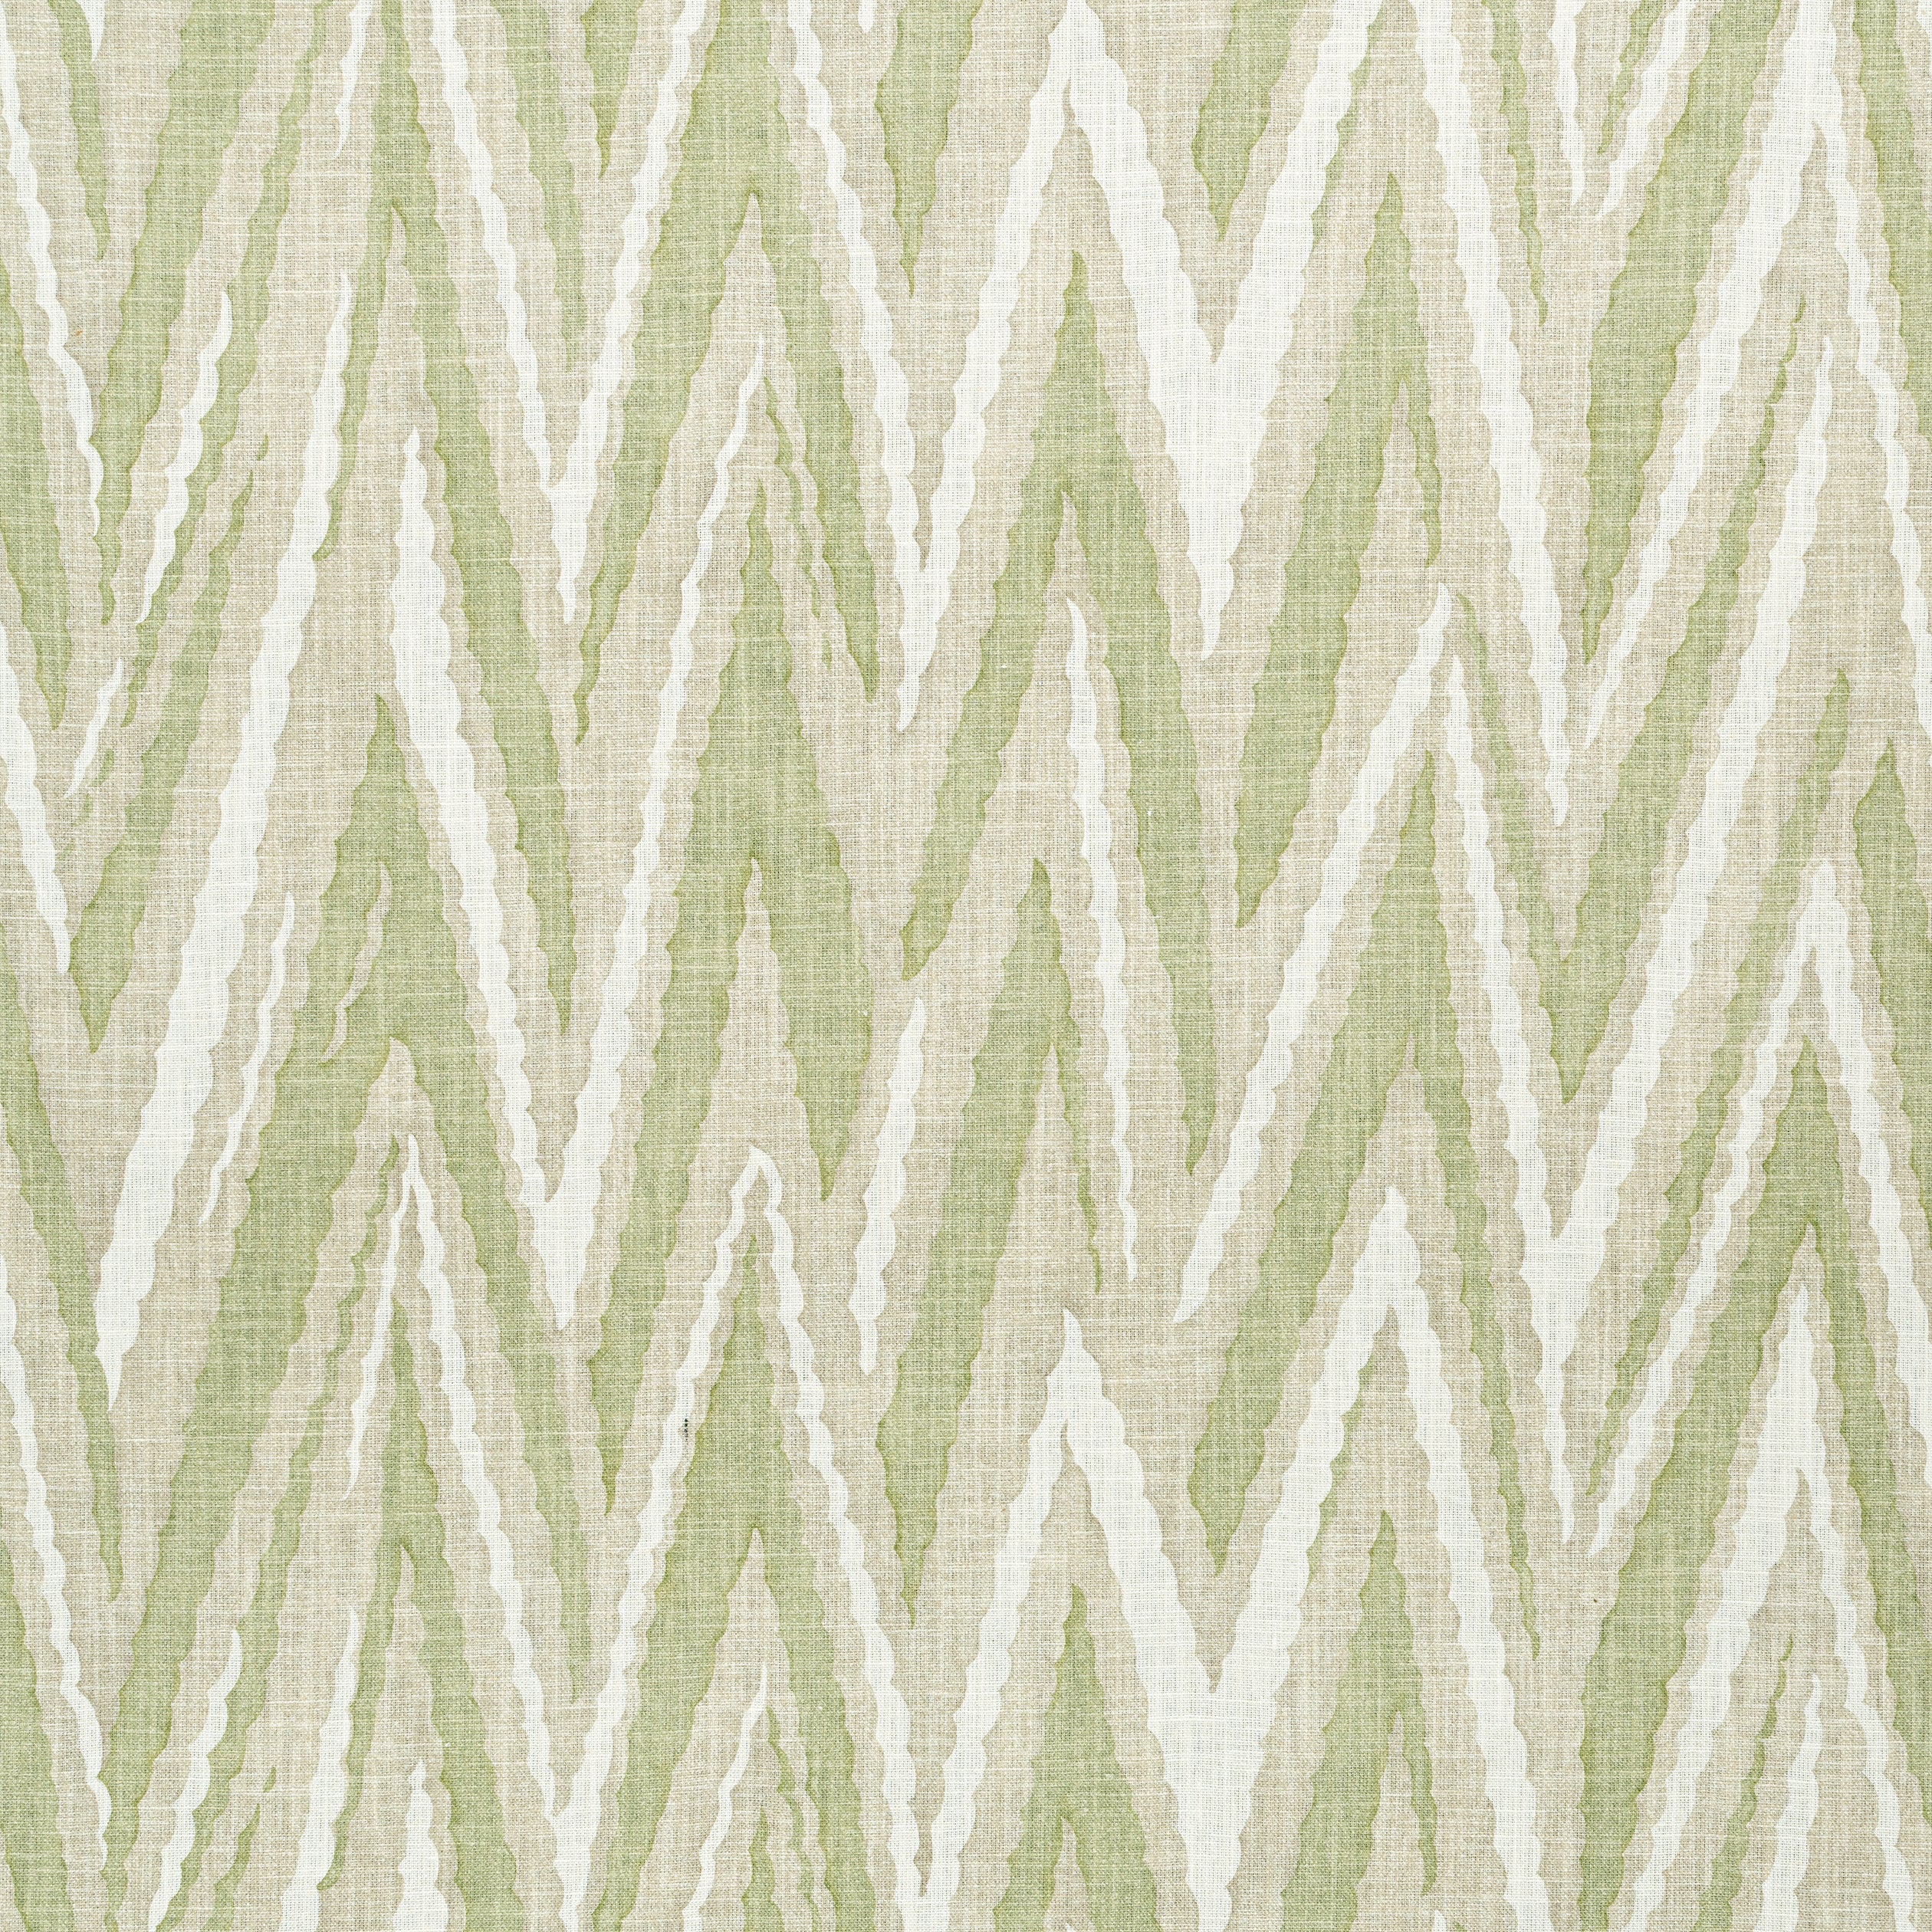 Highland Peak fabric in green color - pattern number AF23140 - by Anna French in the Willow Tree collection